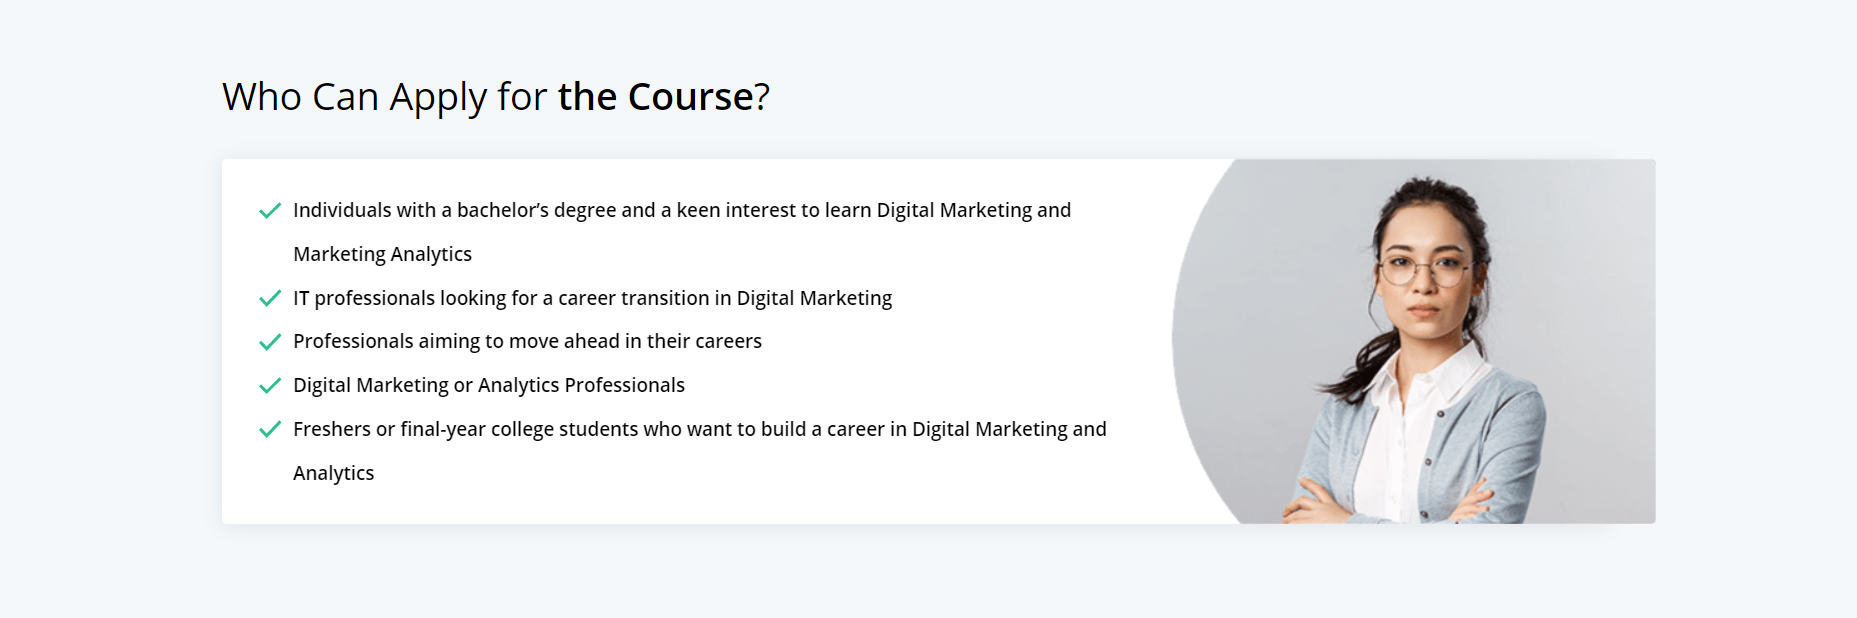 Benefits Of This Course by Digiwebengineers